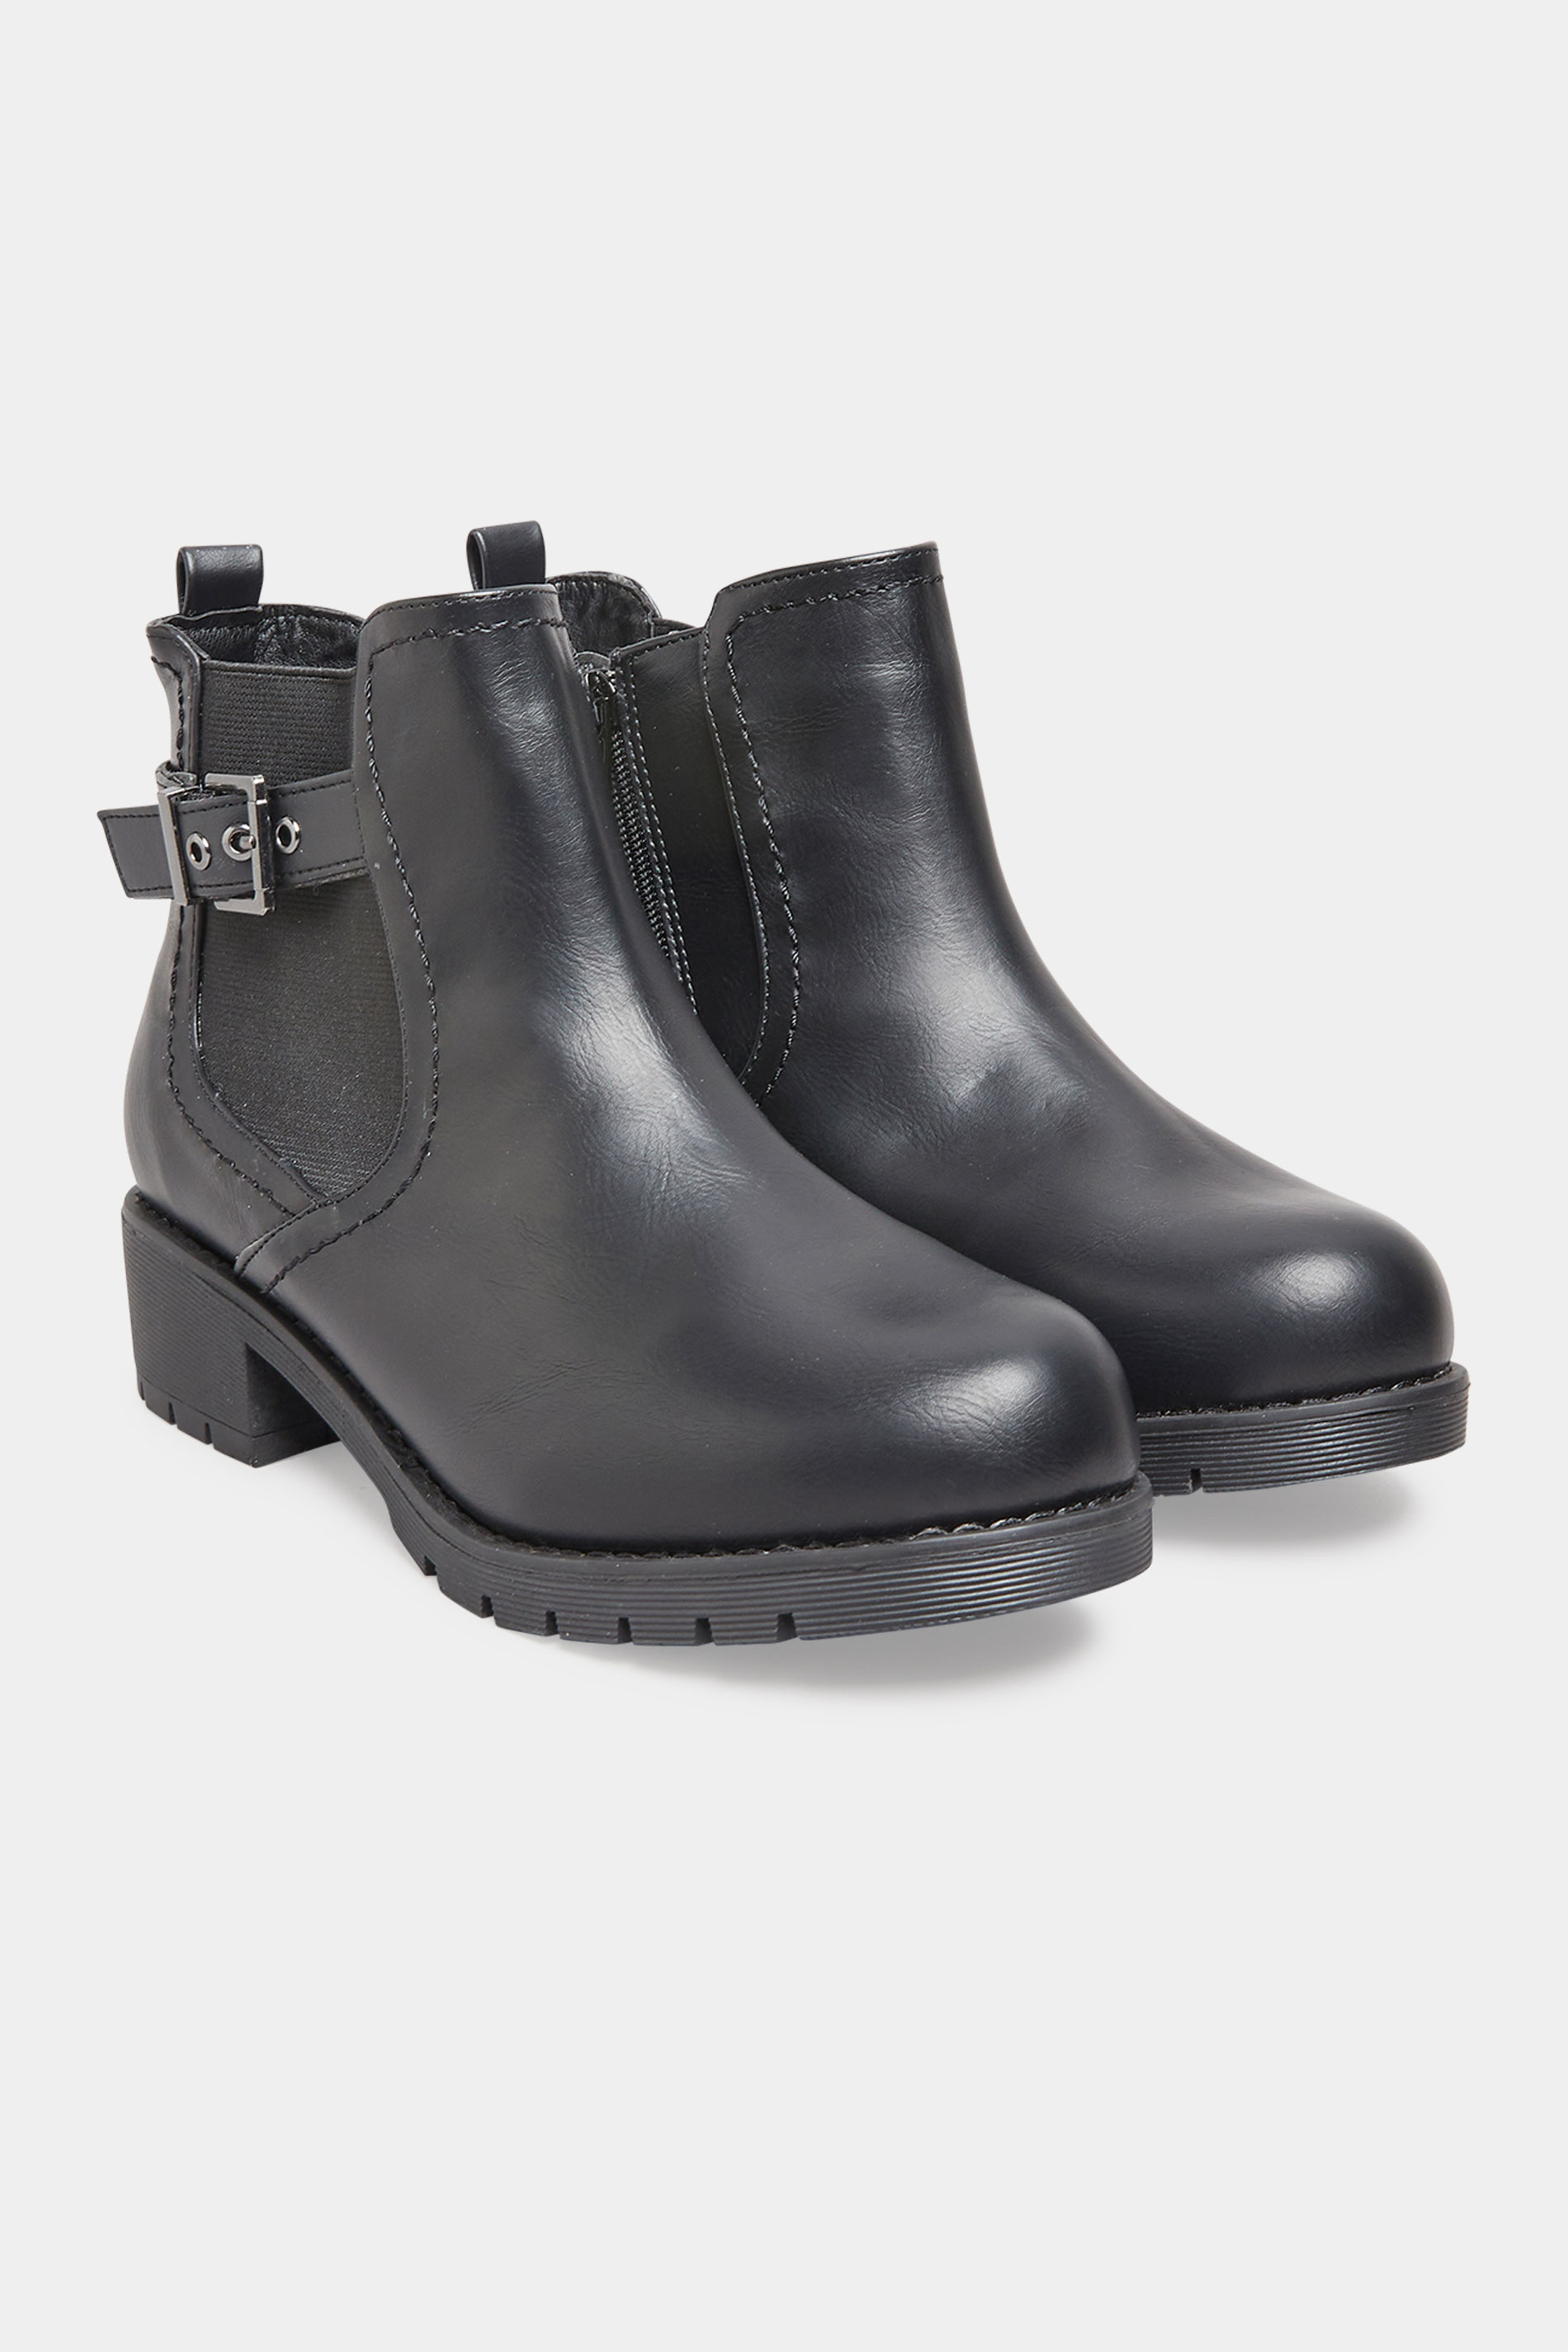 Black Chelsea Buckle Ankle Boots In Extra Wide Fit | Yours Clothing 2